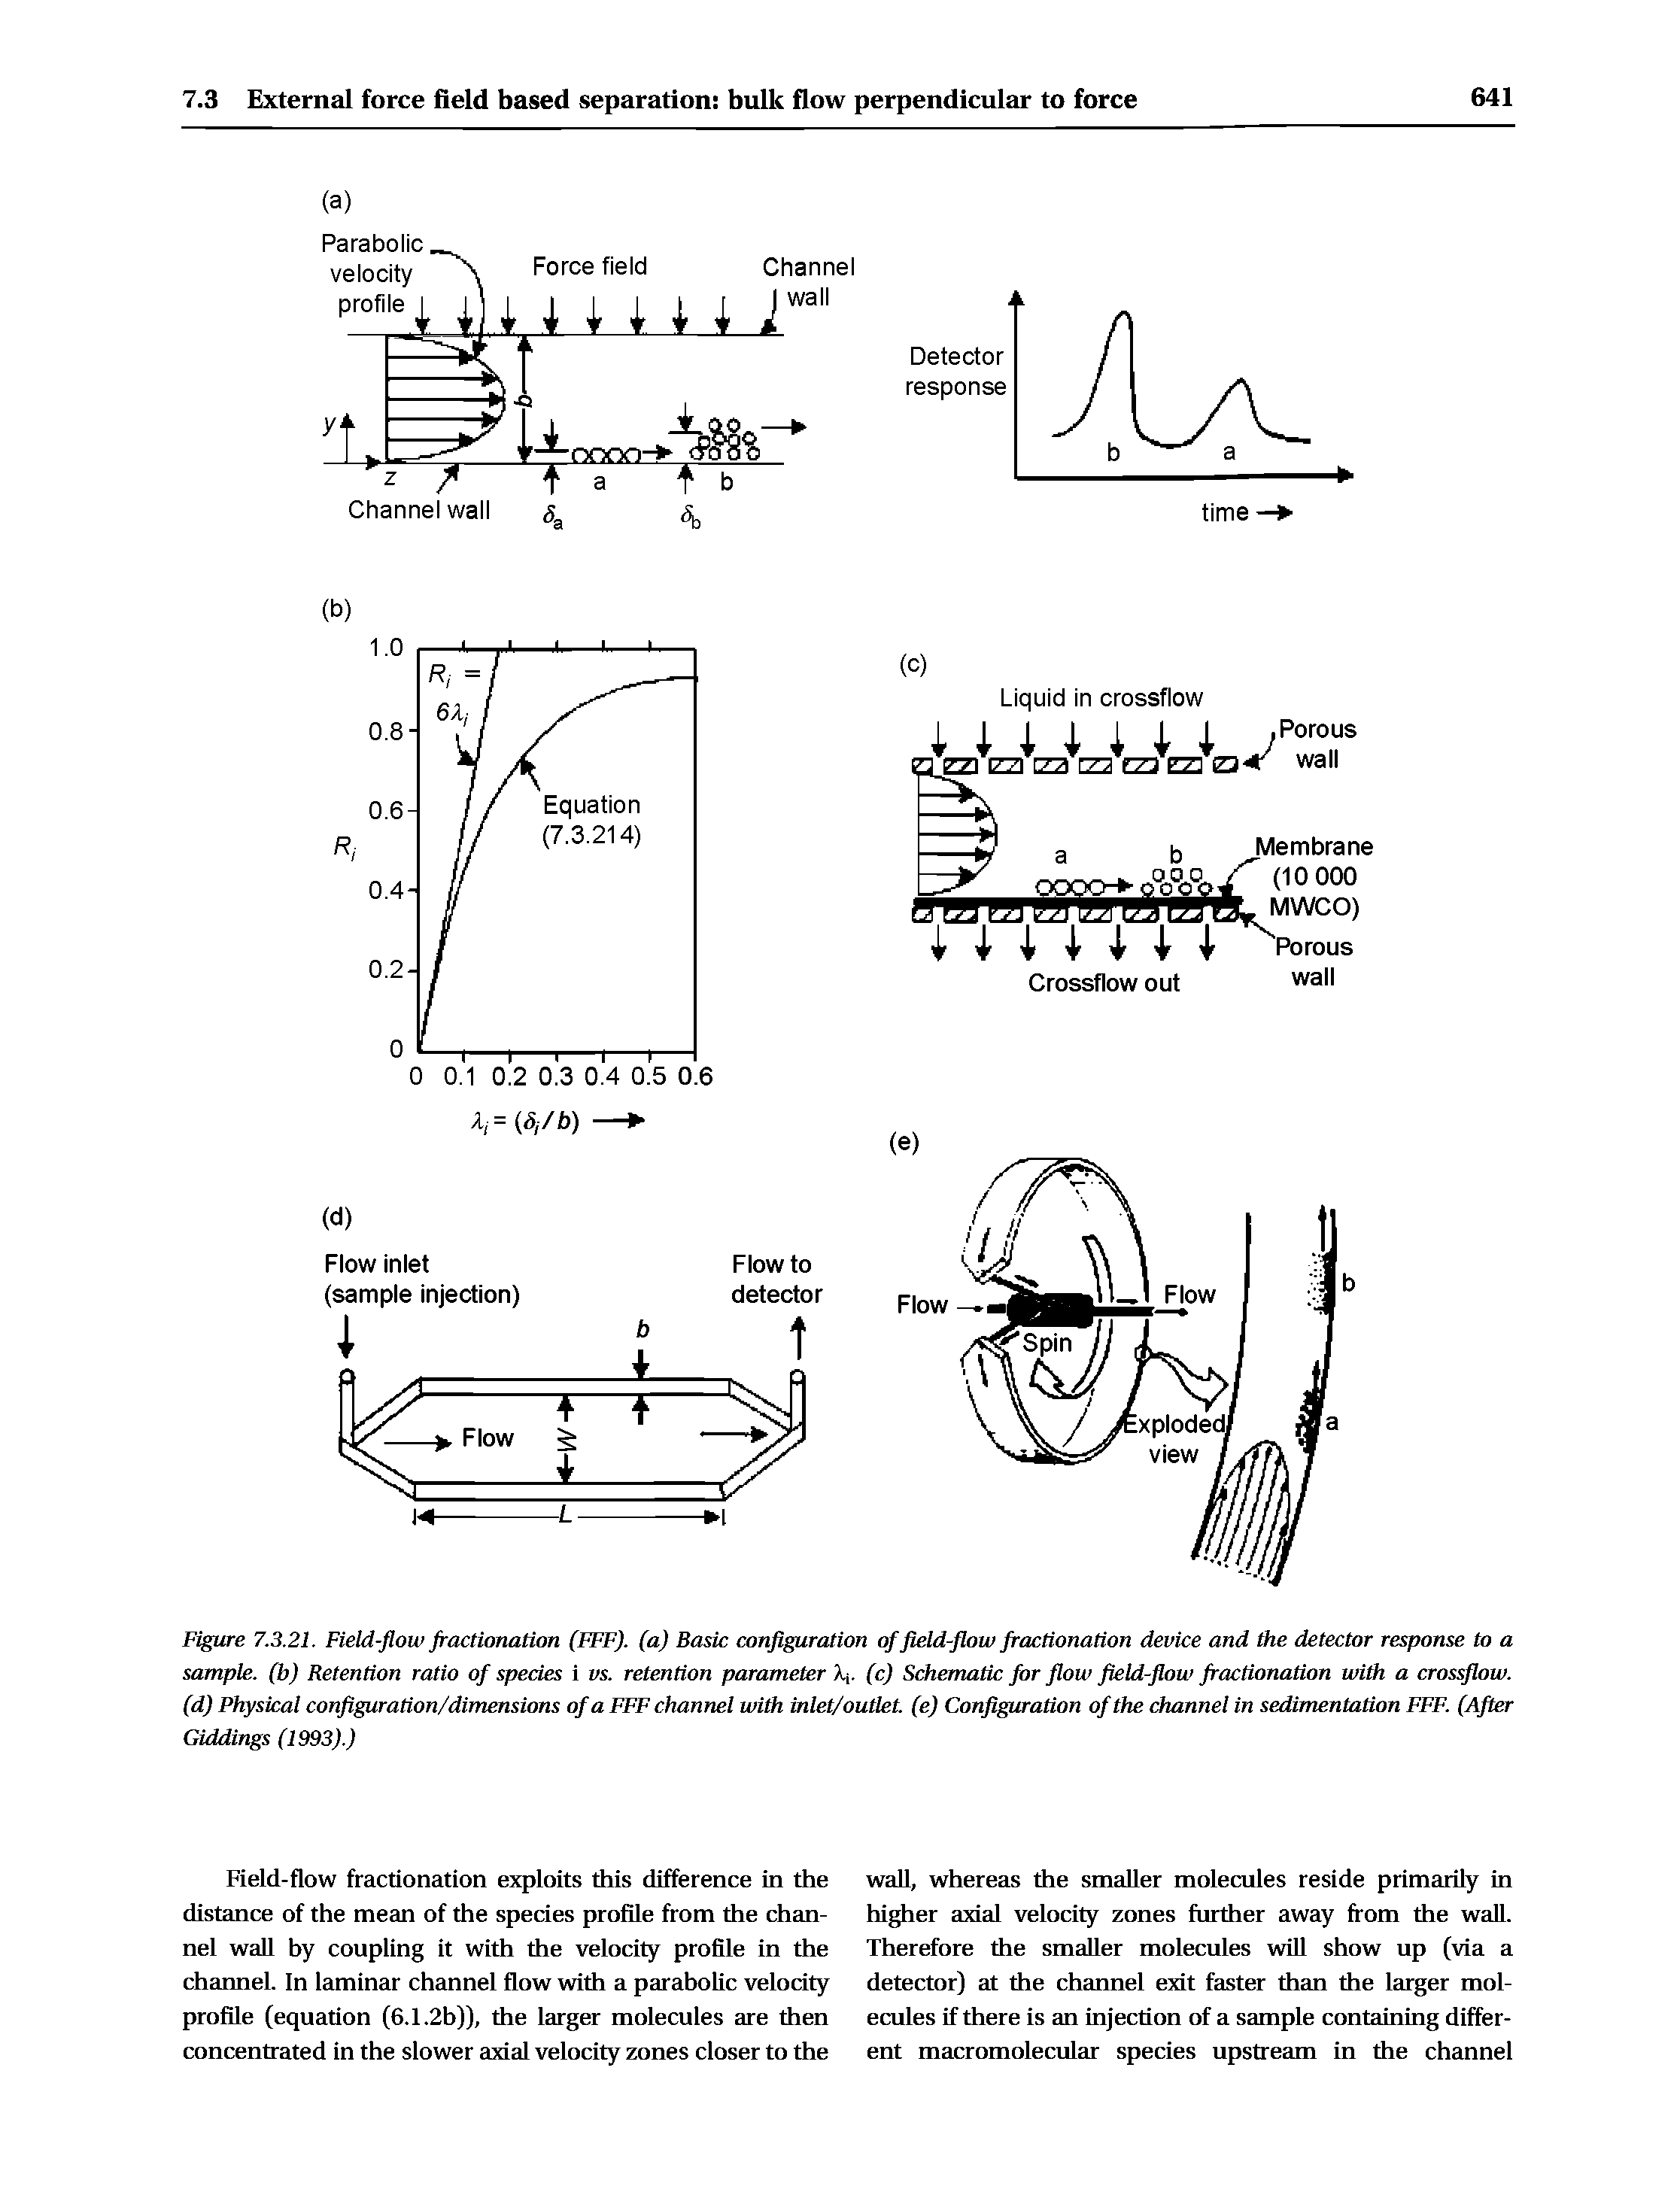 Figure 7.3.21. Field-flow fractionation (FFF). (a) Basic configuration of field-flow fractionation device and the detector response to a sample, (b) Retention ratio of species i vs. retention parameter X. (c) Schematic for flow field-flow fractionation with a cros ow. (d) Fhysical configuration/dimensions of a FFF channel with inlet/outlet. (e) Configuration of the channel in sedimentation FFF. (After Giddings (1993).)...